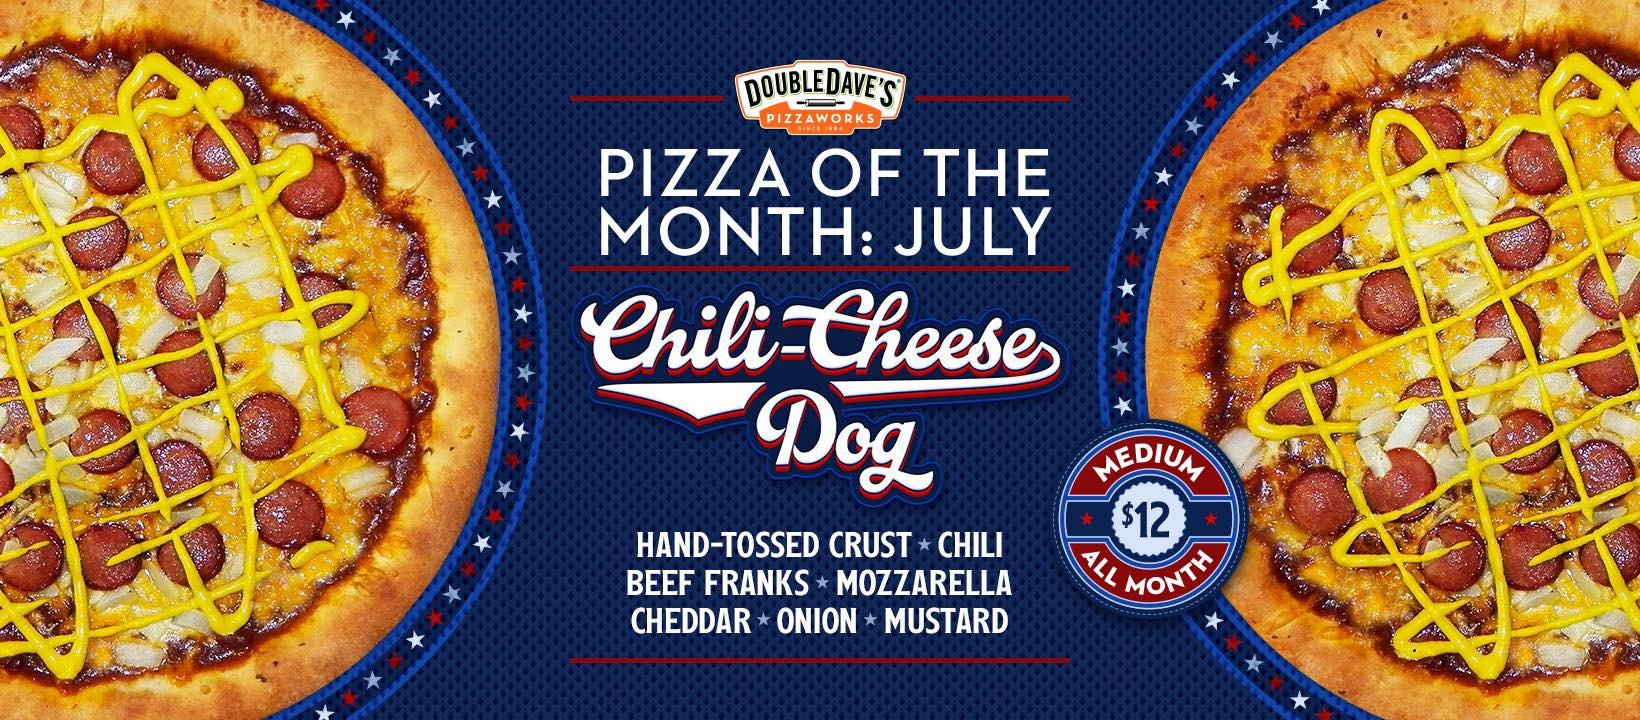 DoubleDave's Pizzaworks 4th of July Pizza of the Month: Chili Cheese Dog Medium Pizza for $12